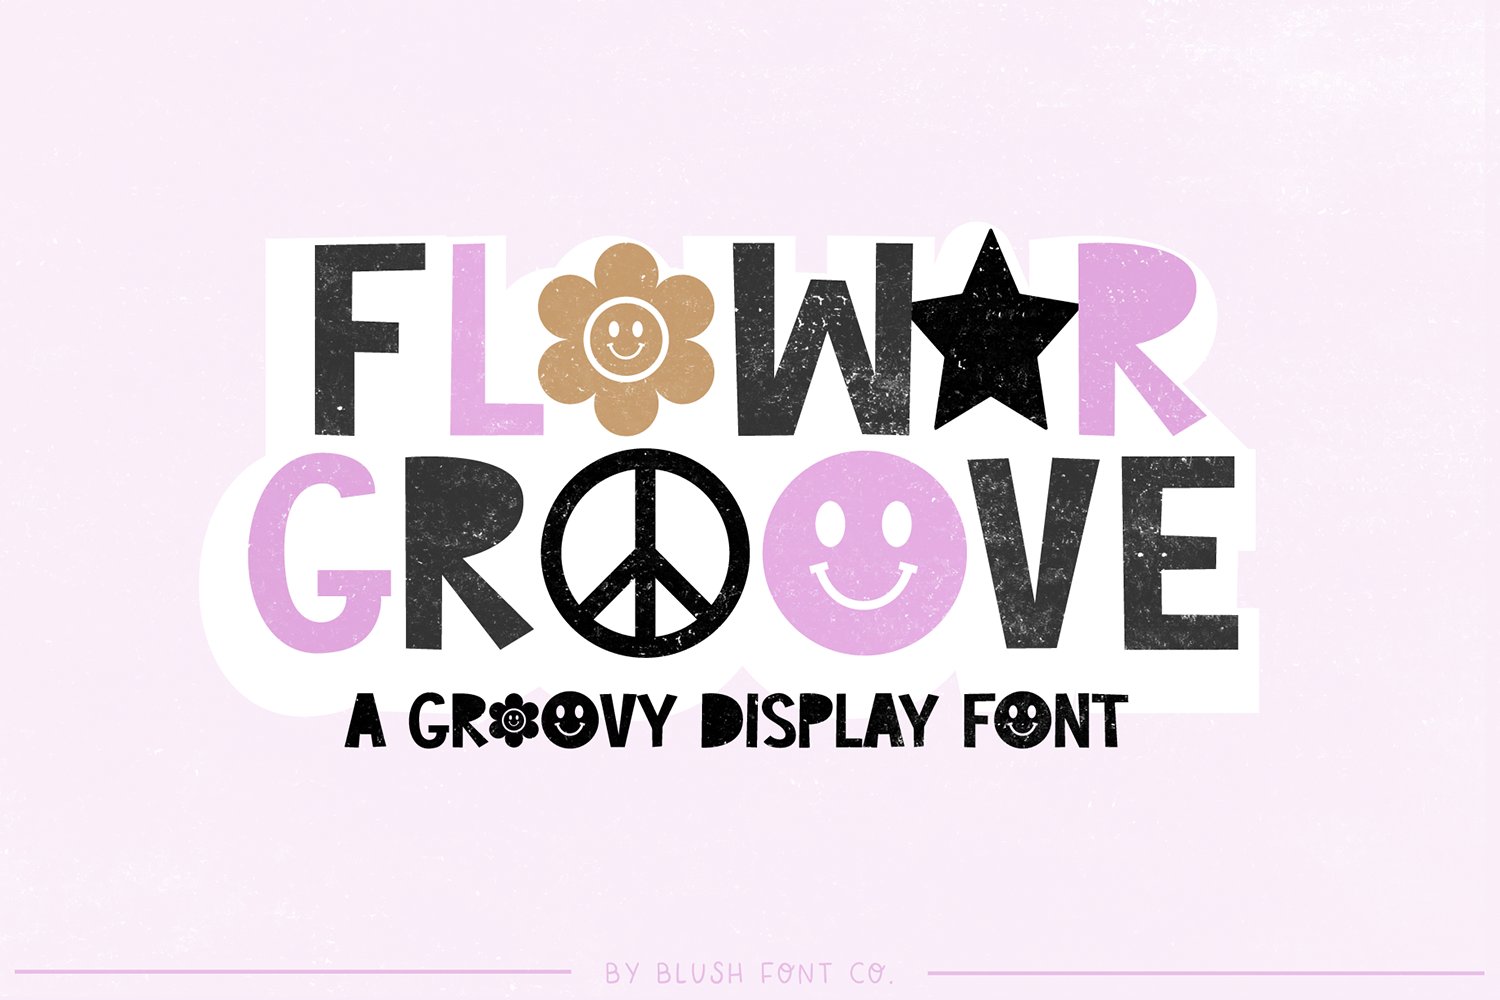 FLOWER GROOVE Retro Smiley Face Font cover image.